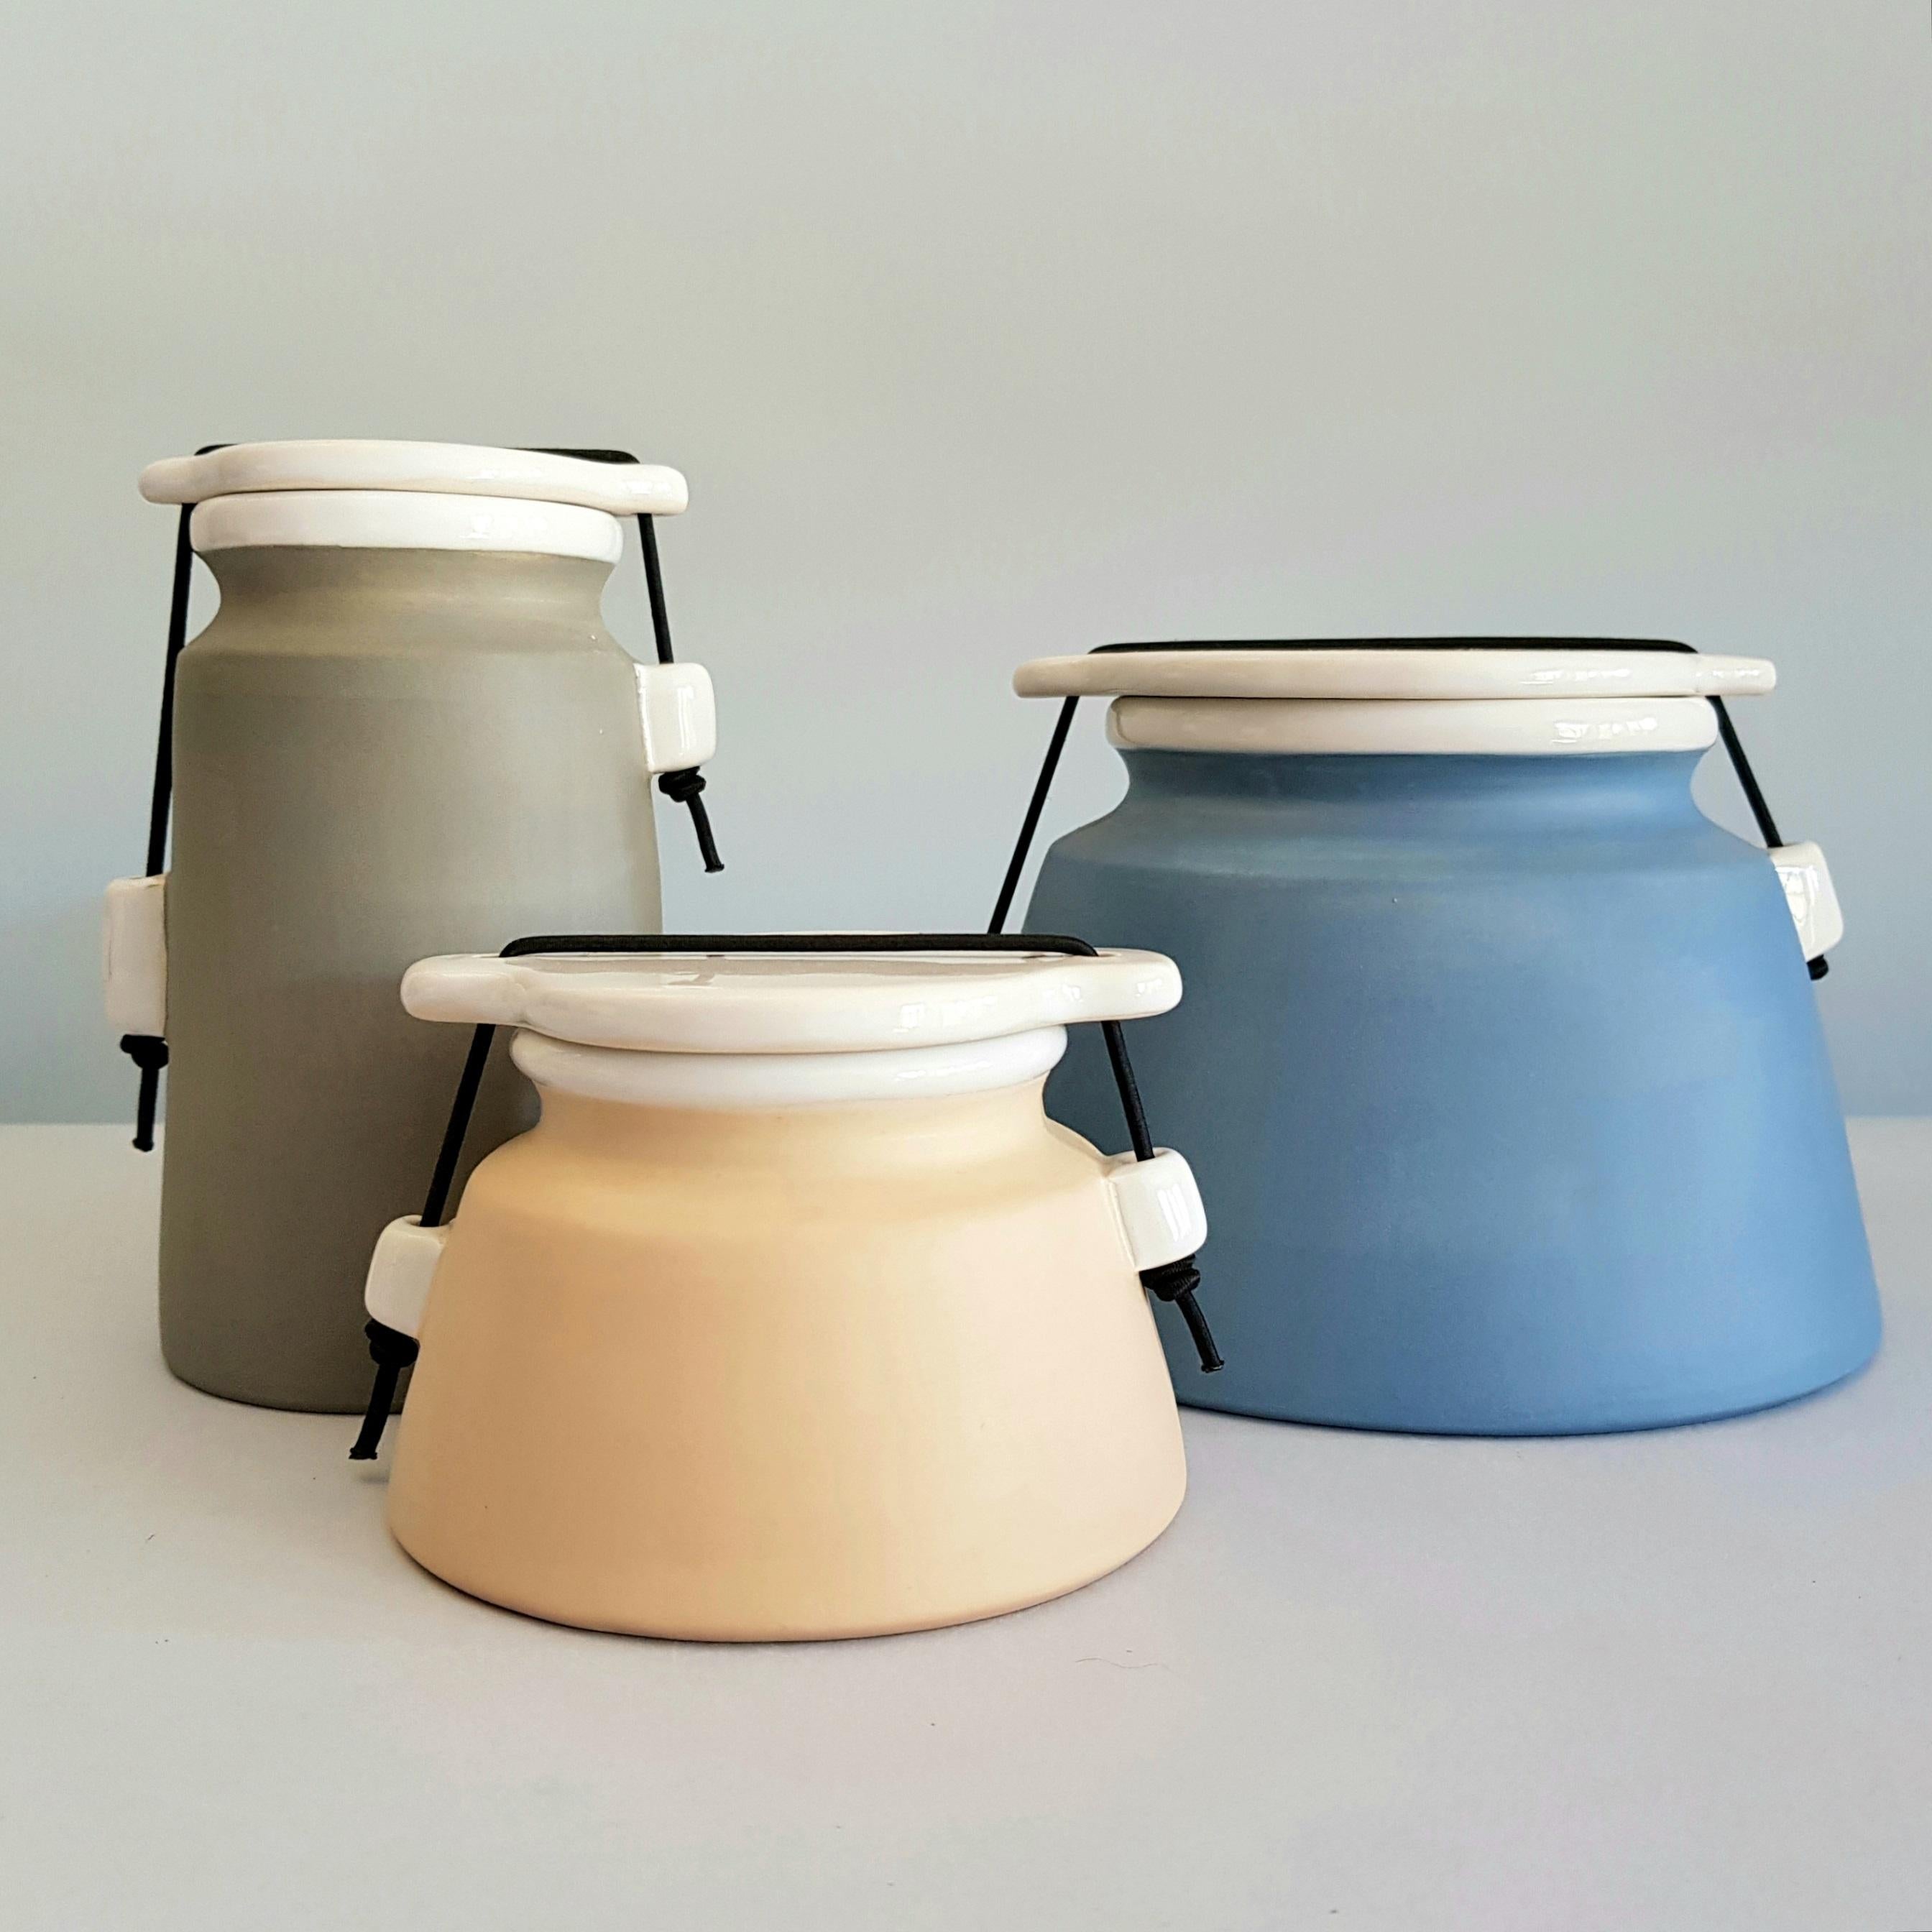 Modern Amélie Handcrafted Jars, Handmade in Italy 2021, Choose Size/Colours For Sale